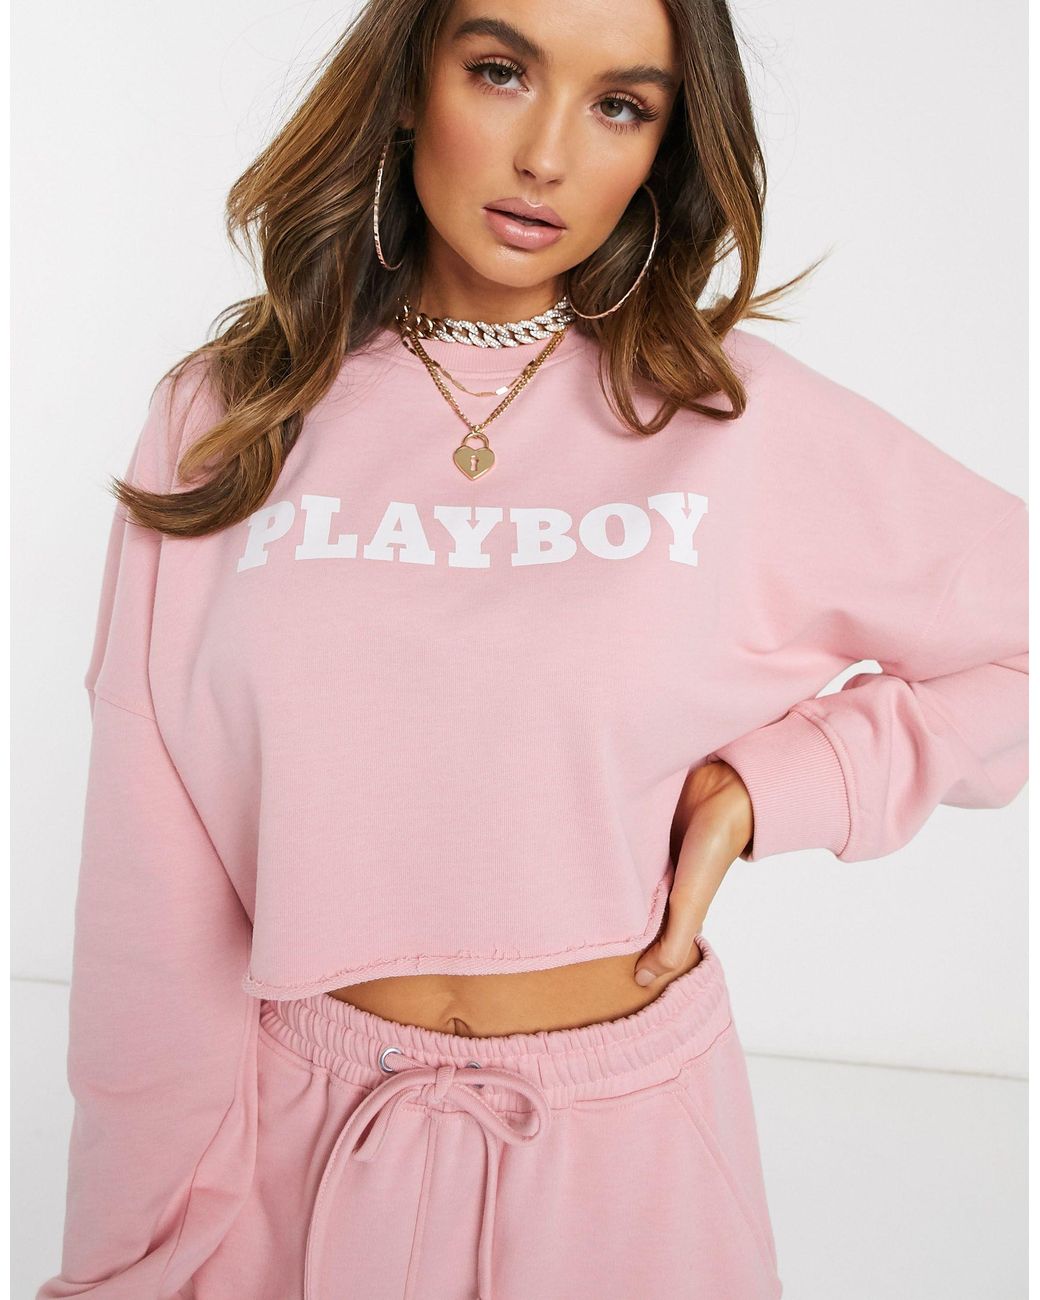 Missguided Playboy Co-ord Cropped Sweatshirt in Pink | Lyst